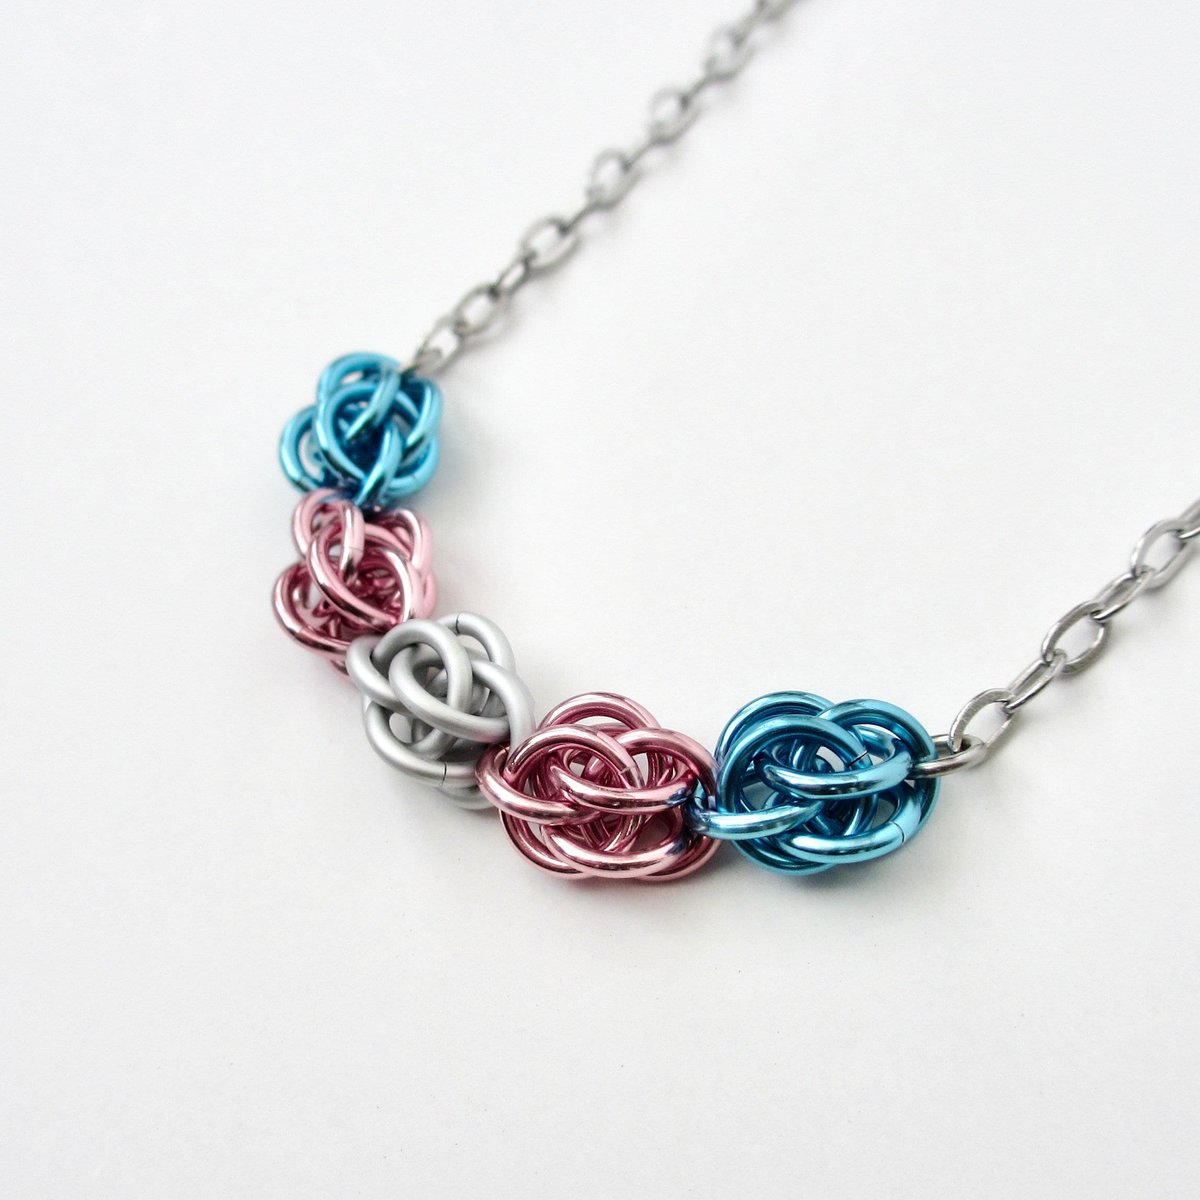 Transgender pride necklace, chainmail Sweetpea weave LGBTQ jewelry